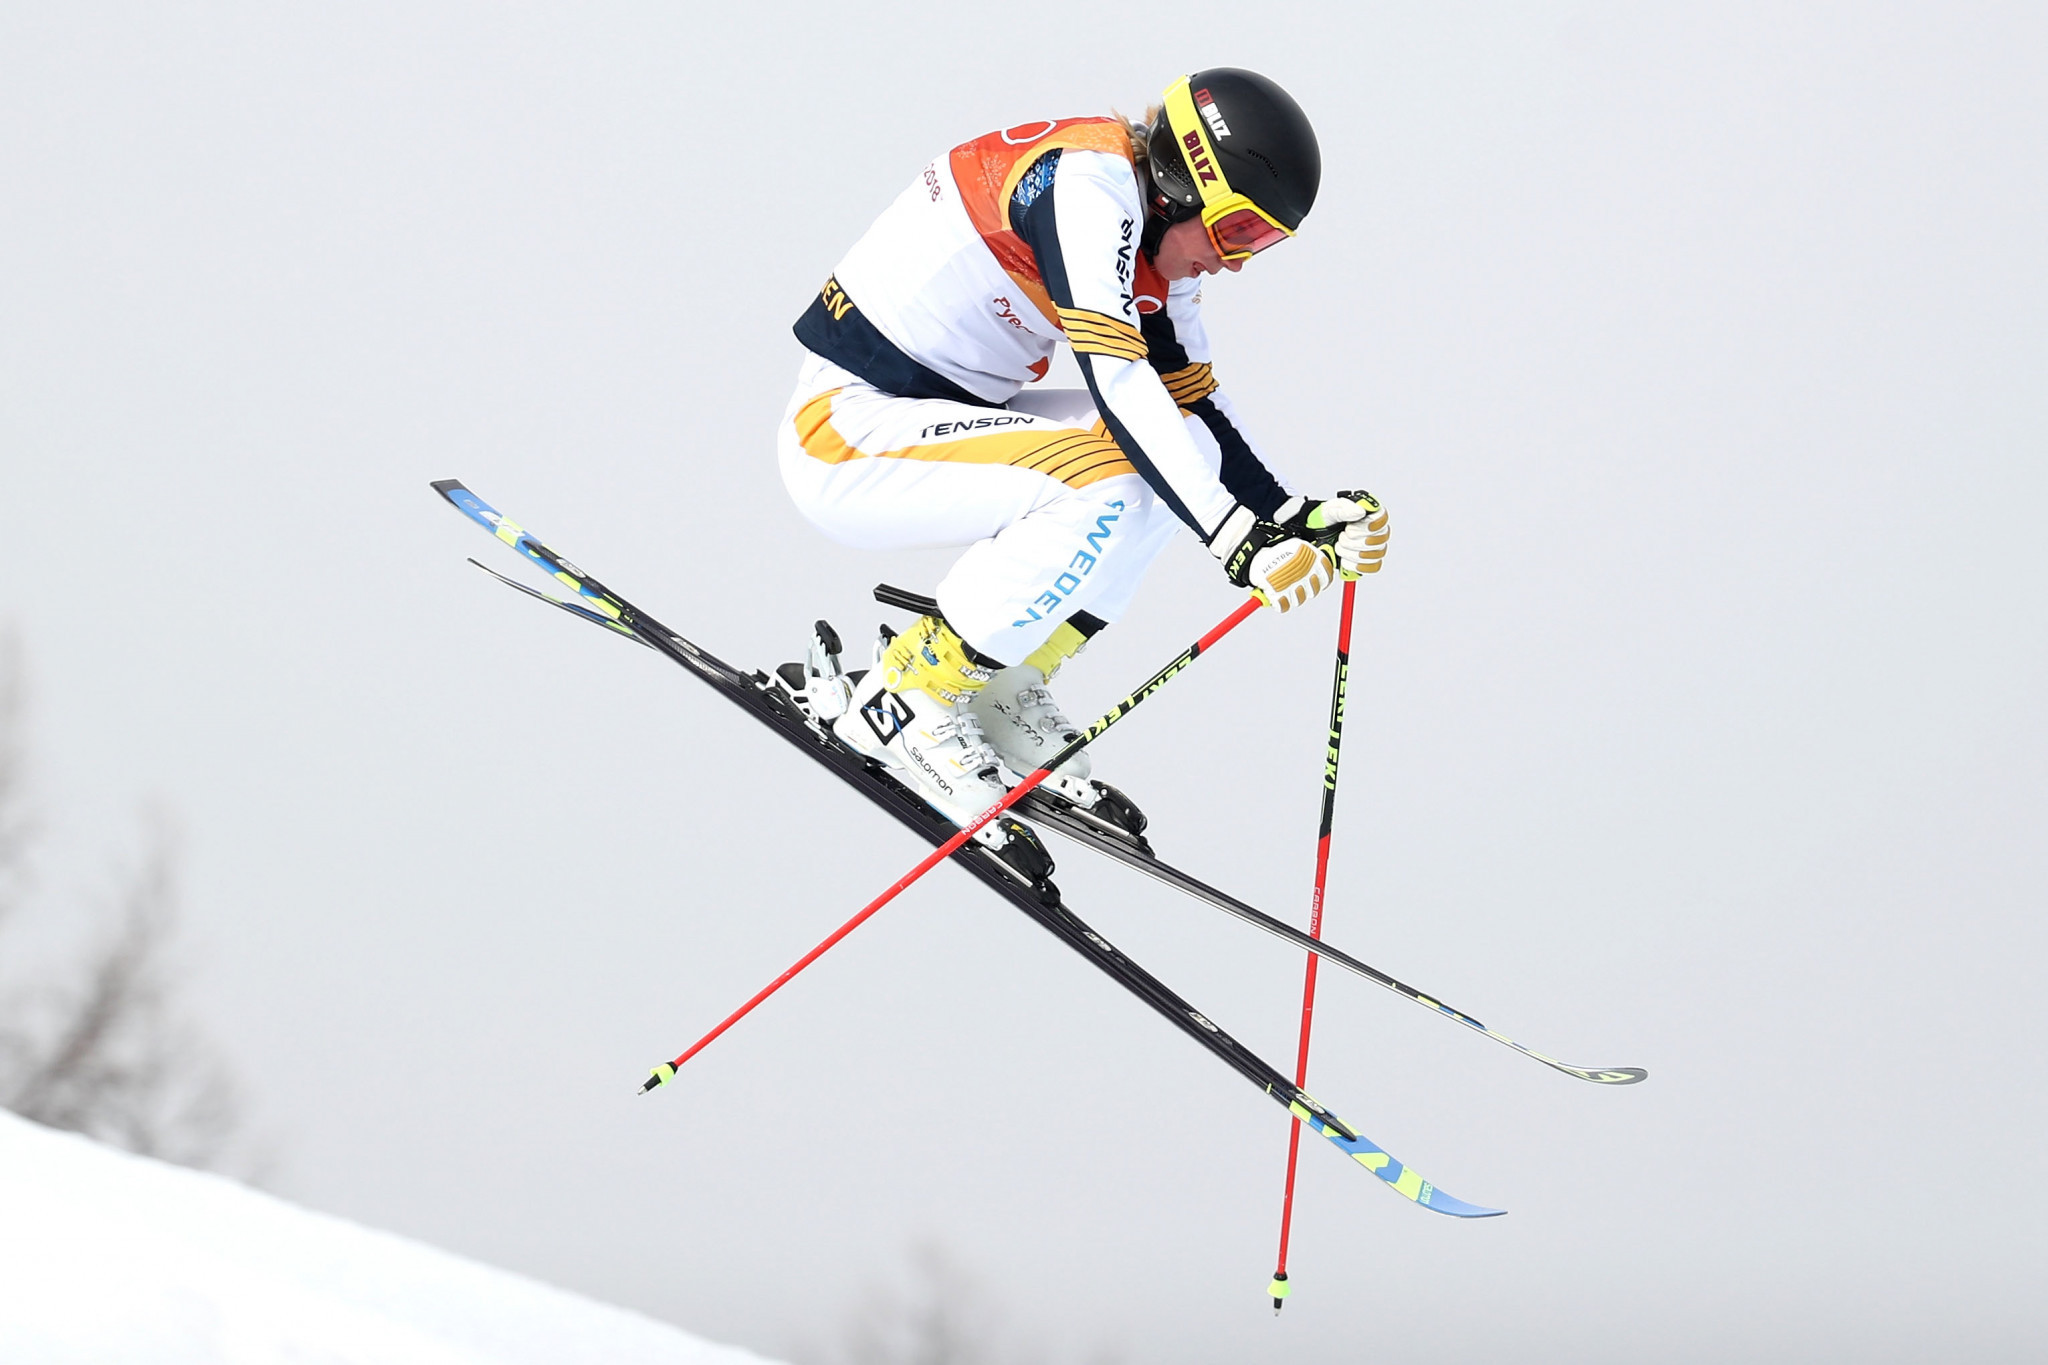 Sandra Näslund only finished fourth in Pyeongchang despite dominating women's ski cross this season ©Getty Images